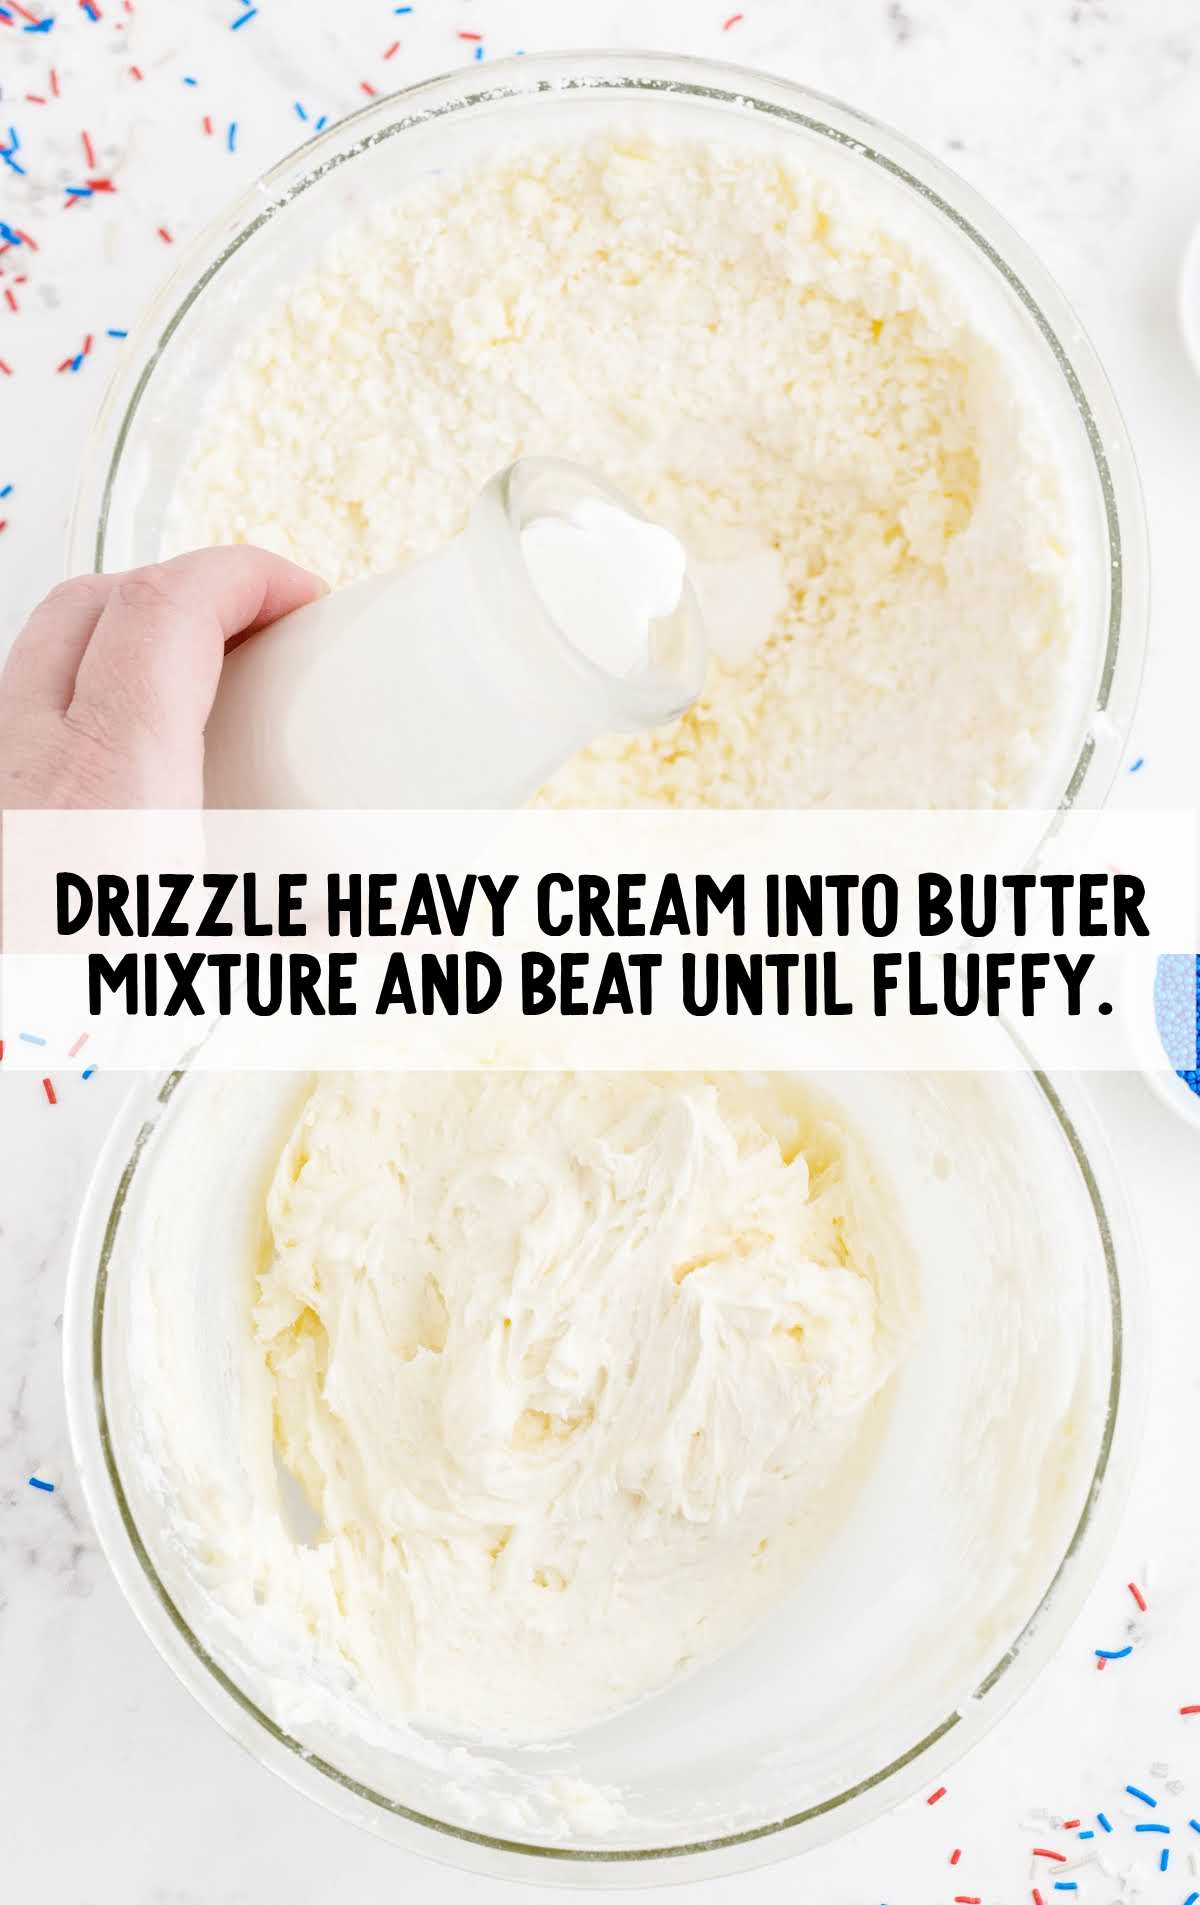 heavy cream drizzled into the butter mixture in the bowl